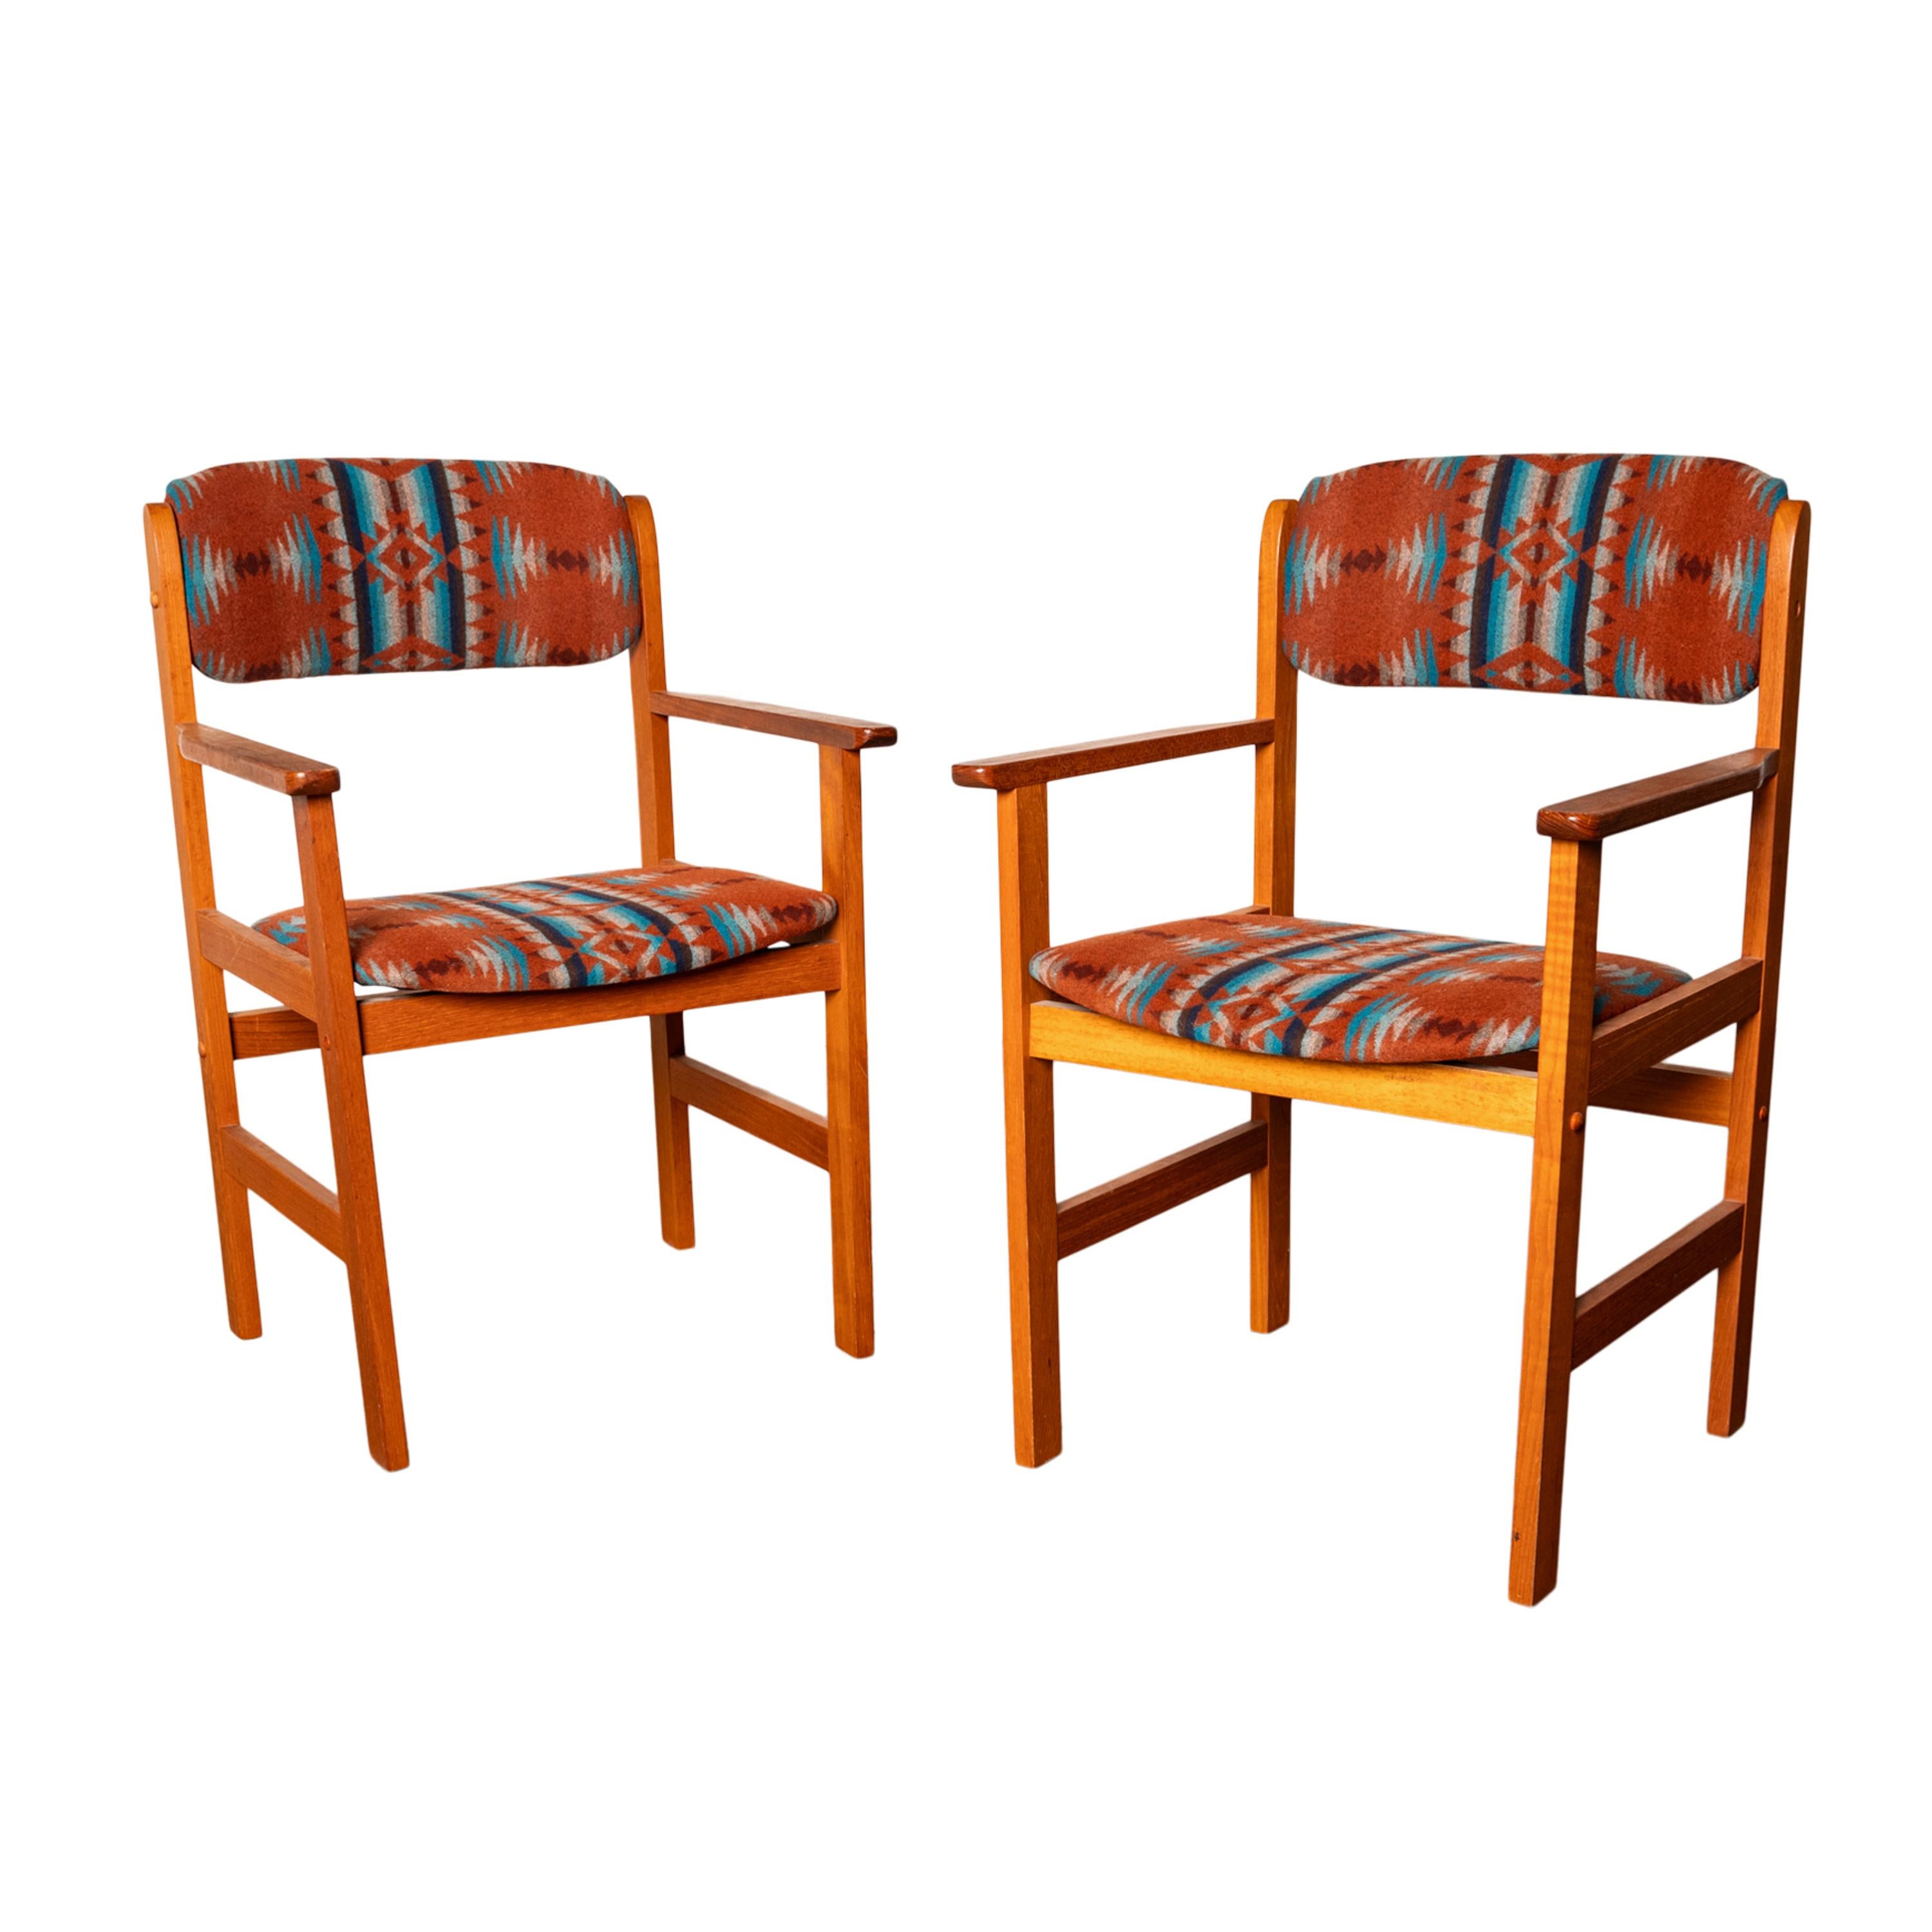 Pair Vintage Mid Century Modern Danish Teak Armchairs Pendleton Wool Fabric 1970 In Good Condition For Sale In Portland, OR